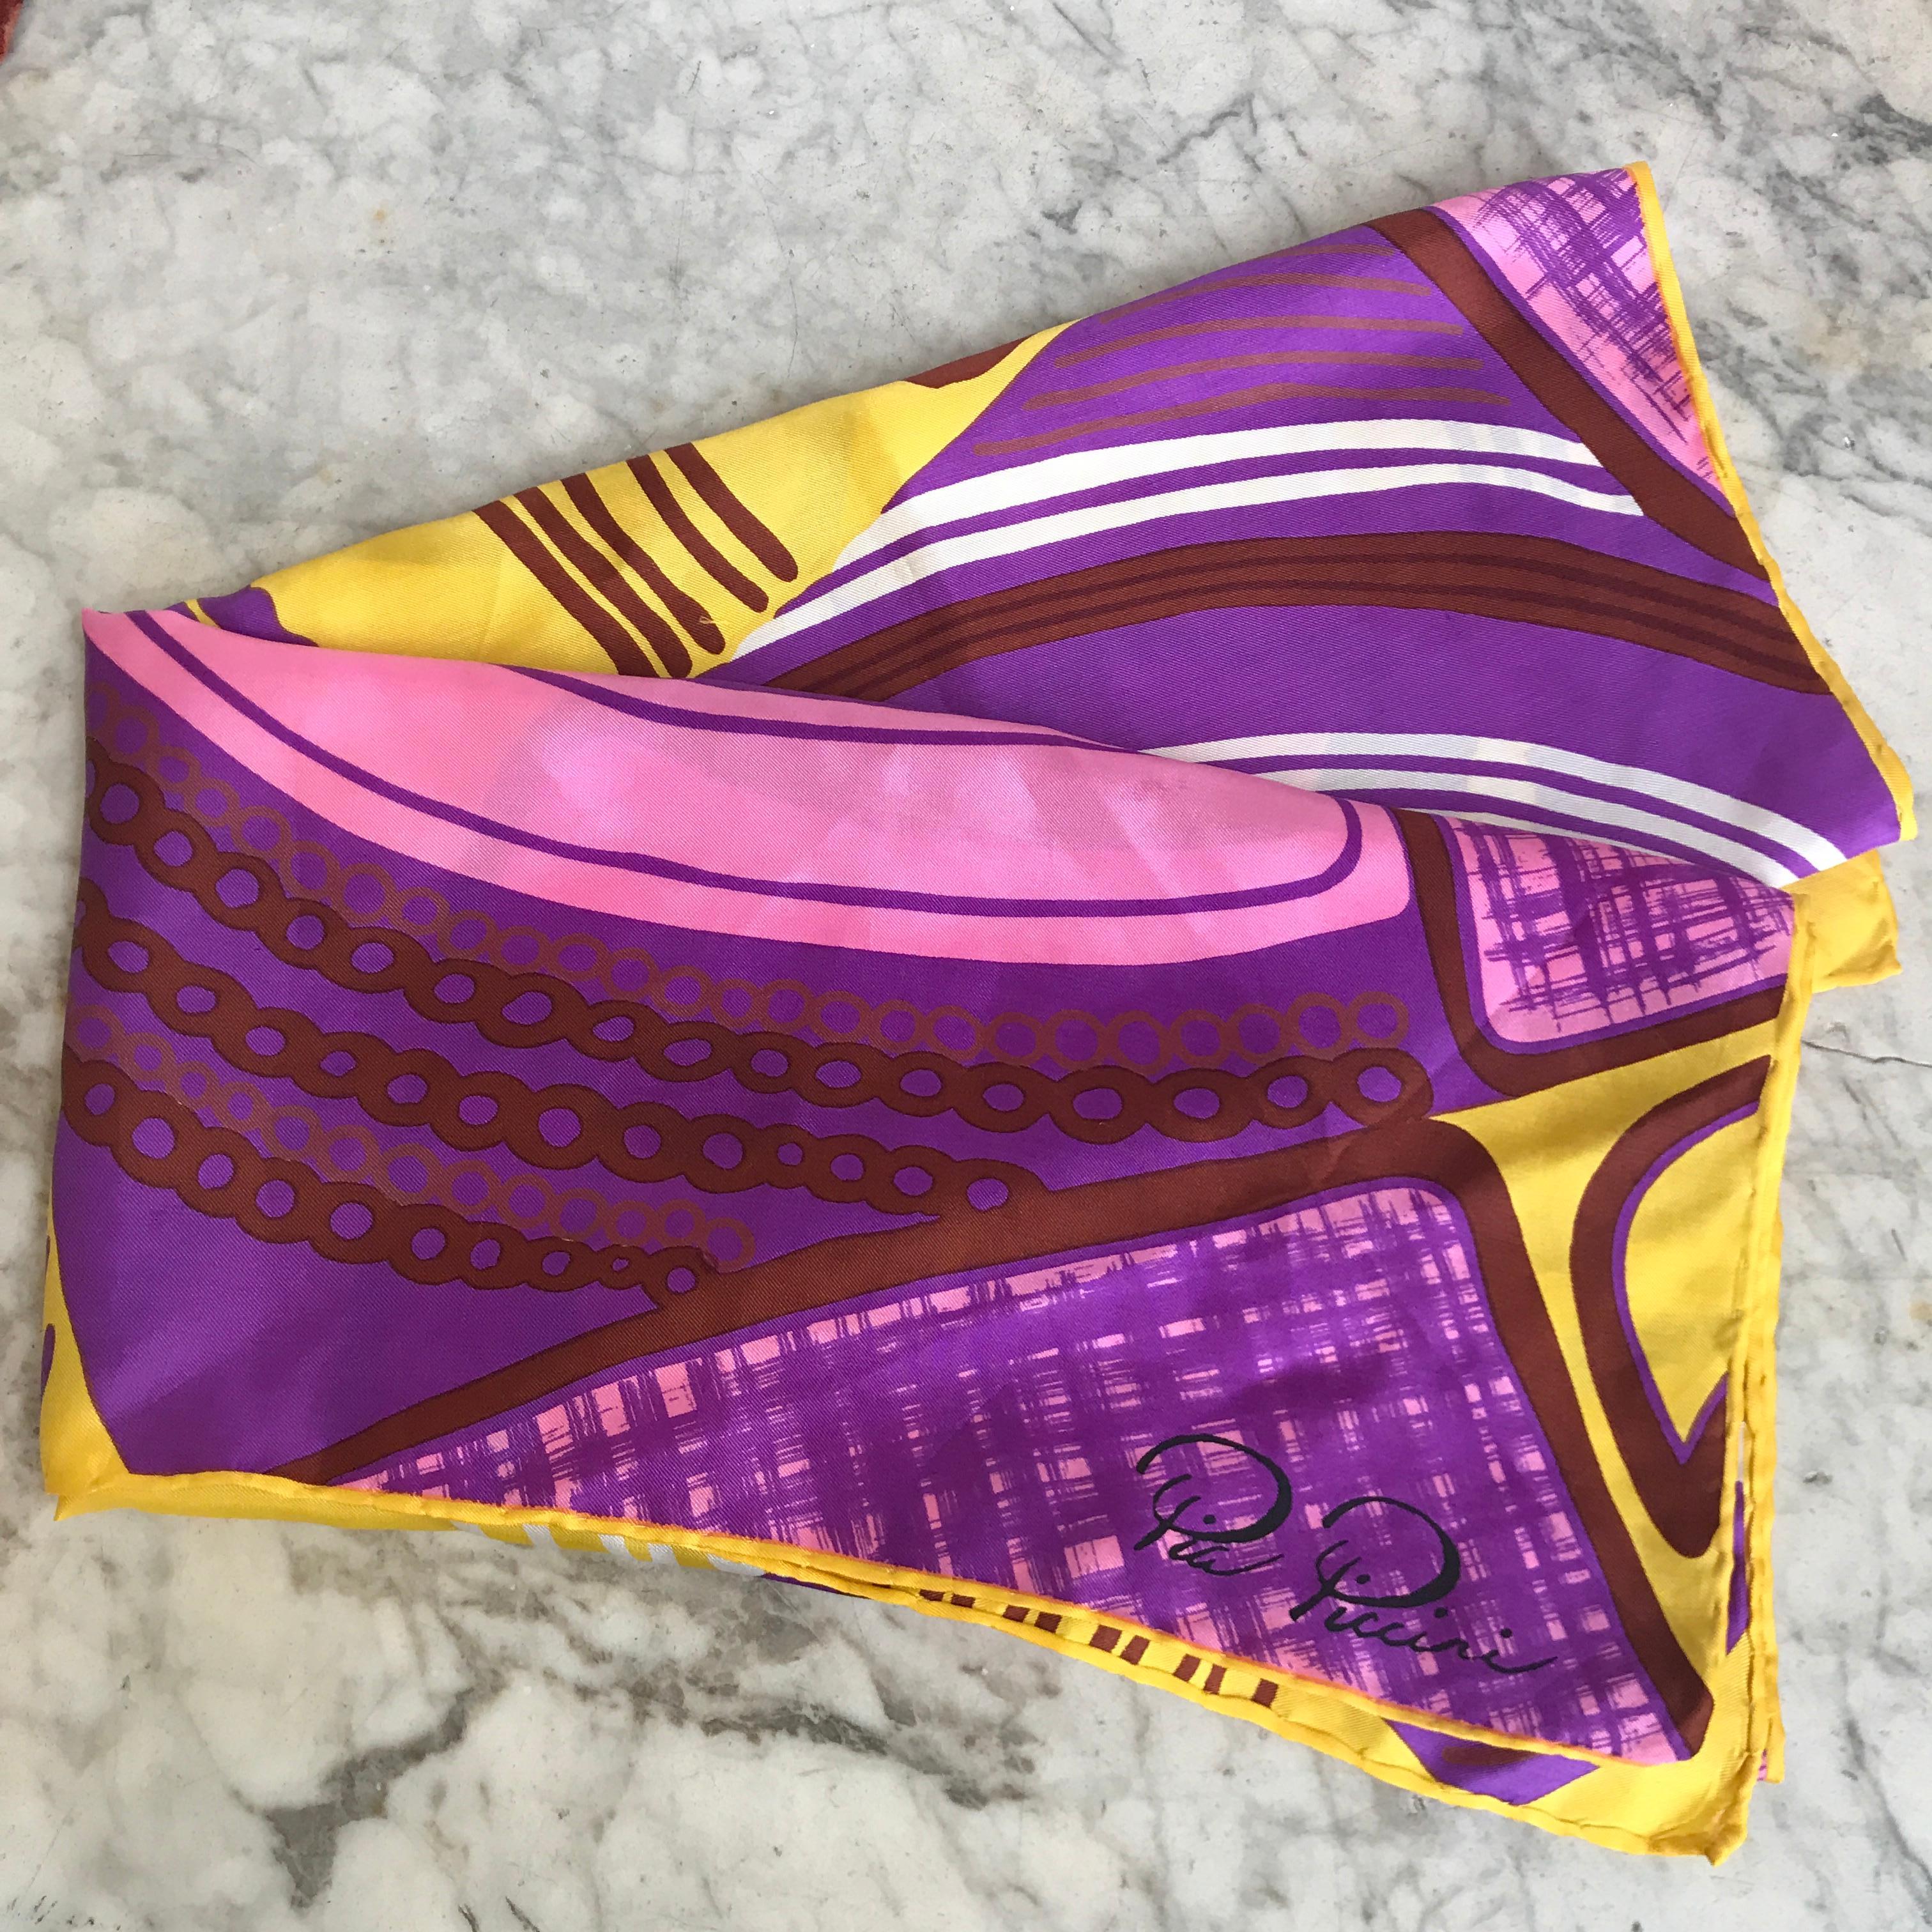 Groovy Italian 1960's silk scarf by Pia Piccini. Very cool abstract print in purple pink brown and golden yellow. Hand rolled and sewn edges attest to the quality .